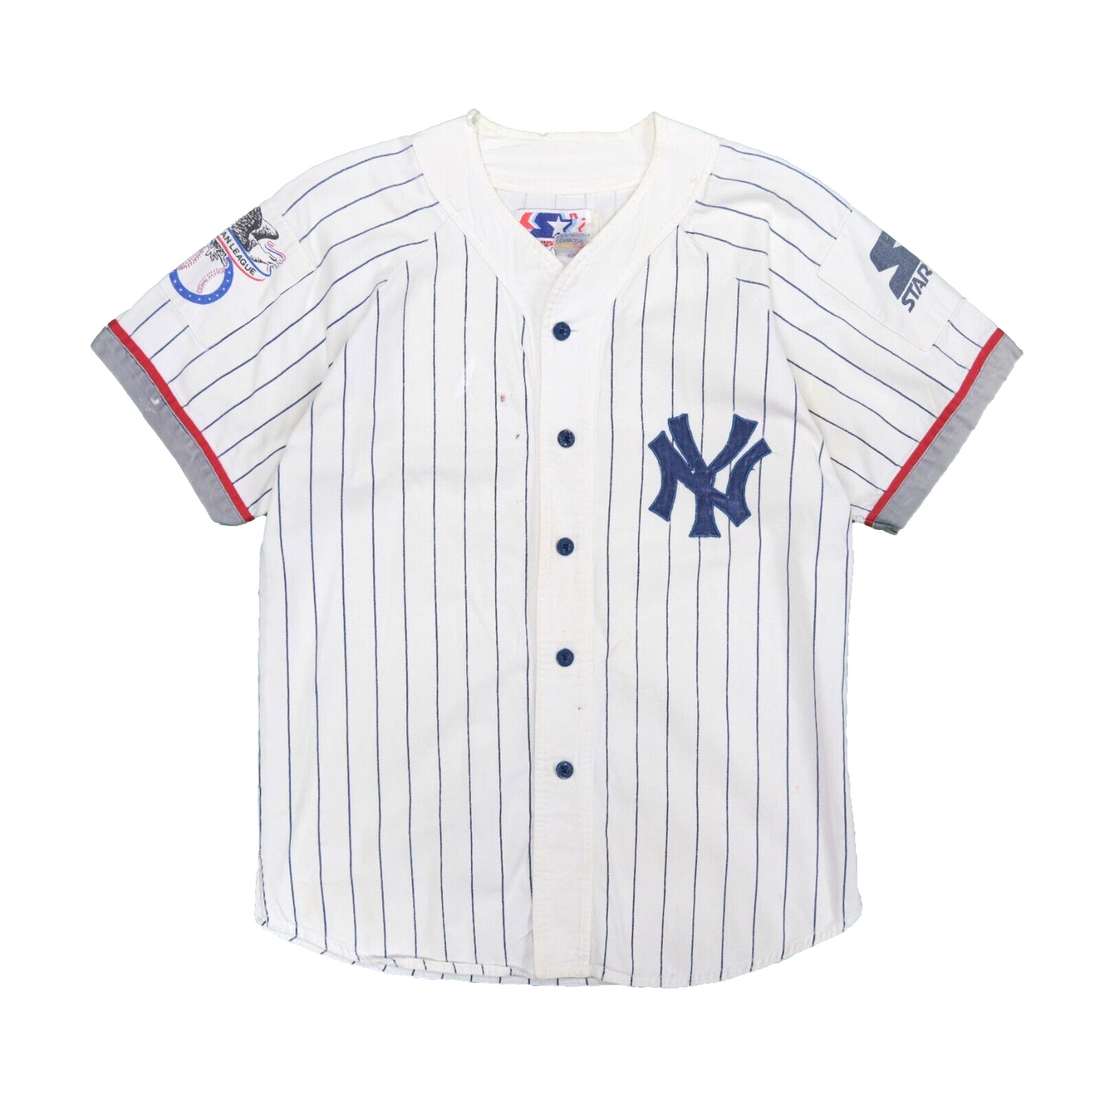  MLB New York Yankees Vintage Throwback Jersey for